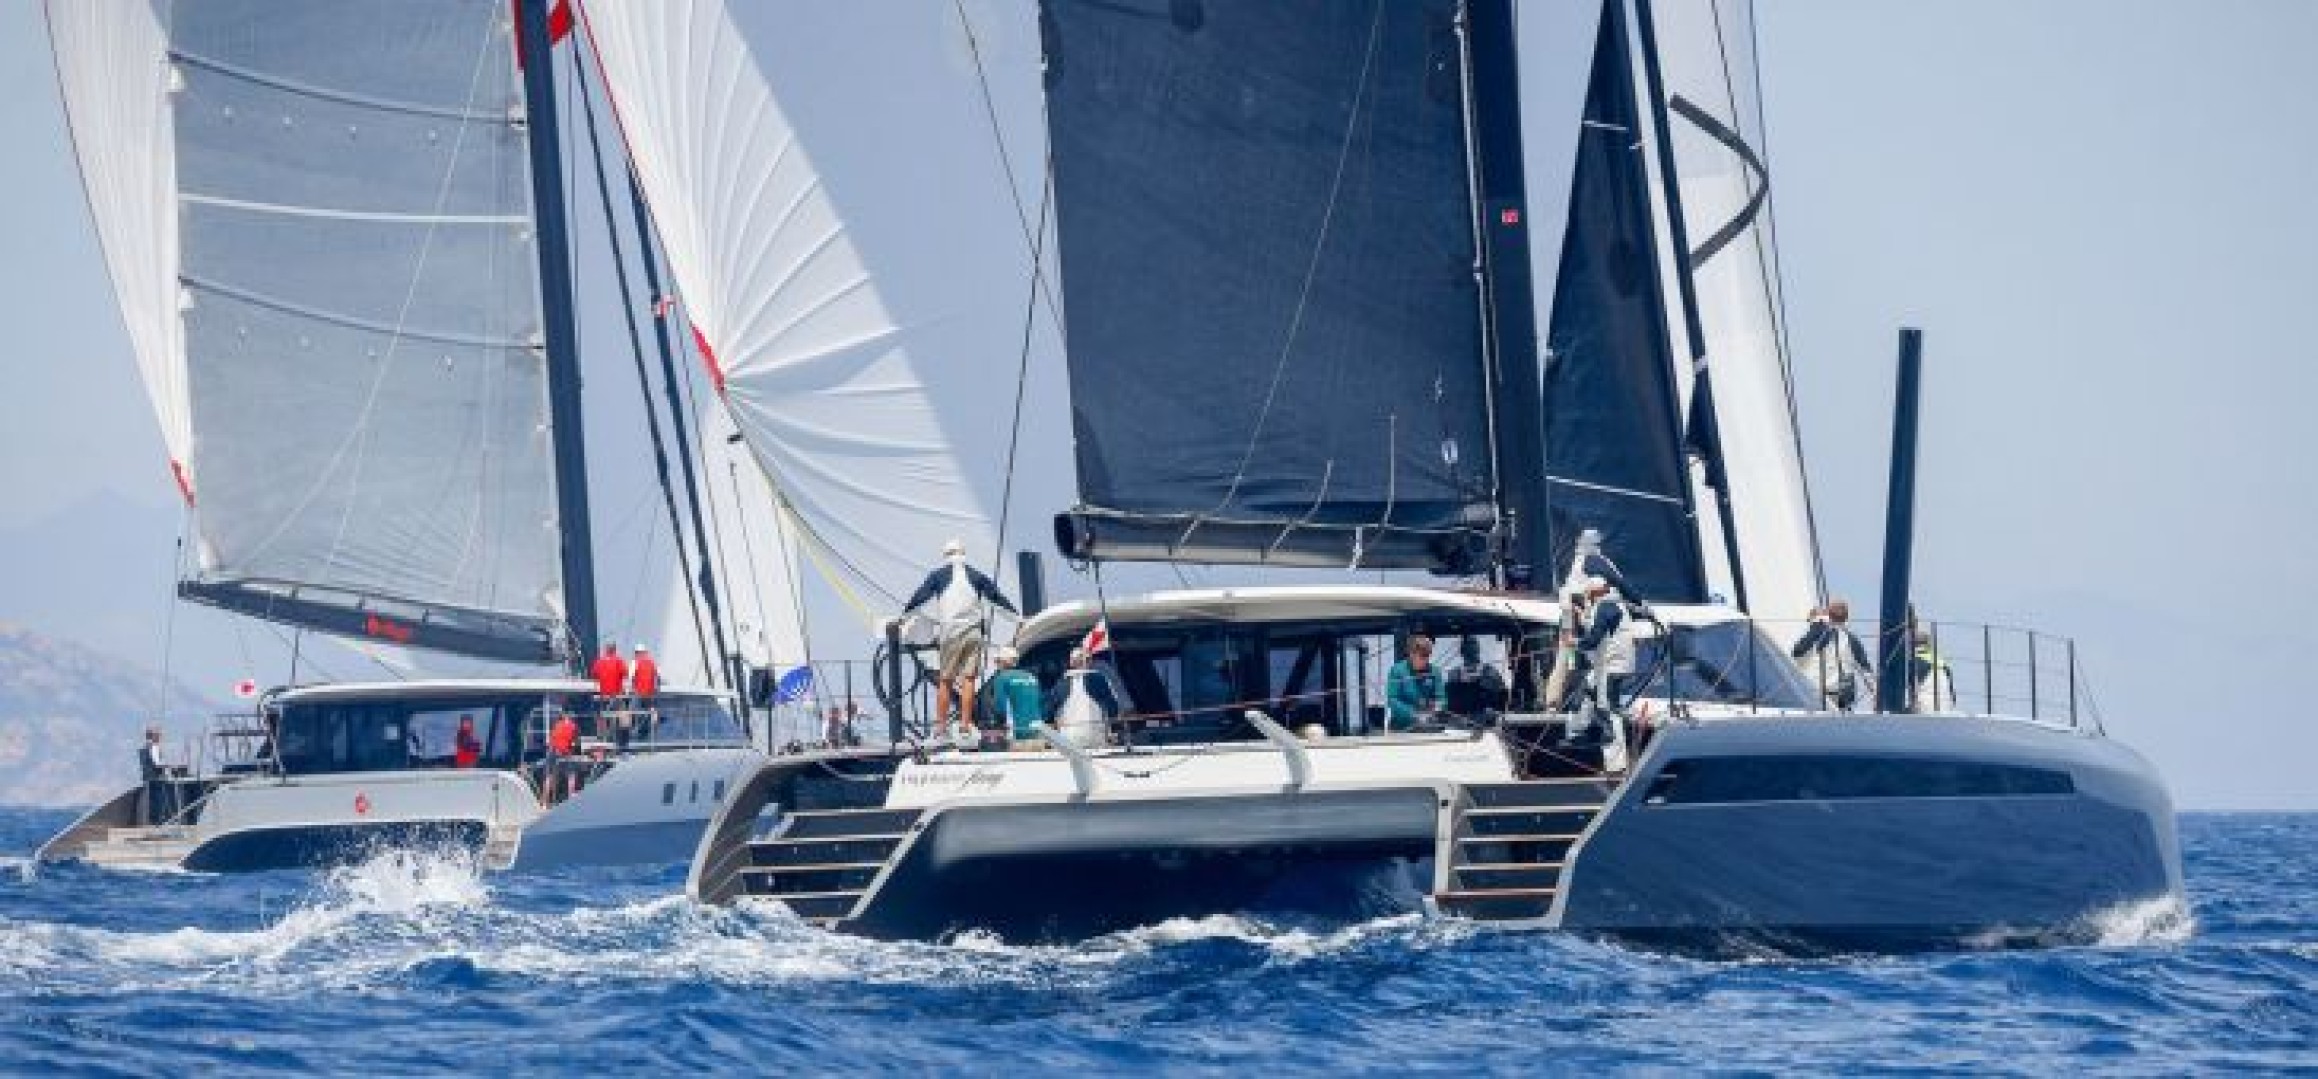 35th Pineapple Cup Montego Bay Race set to start